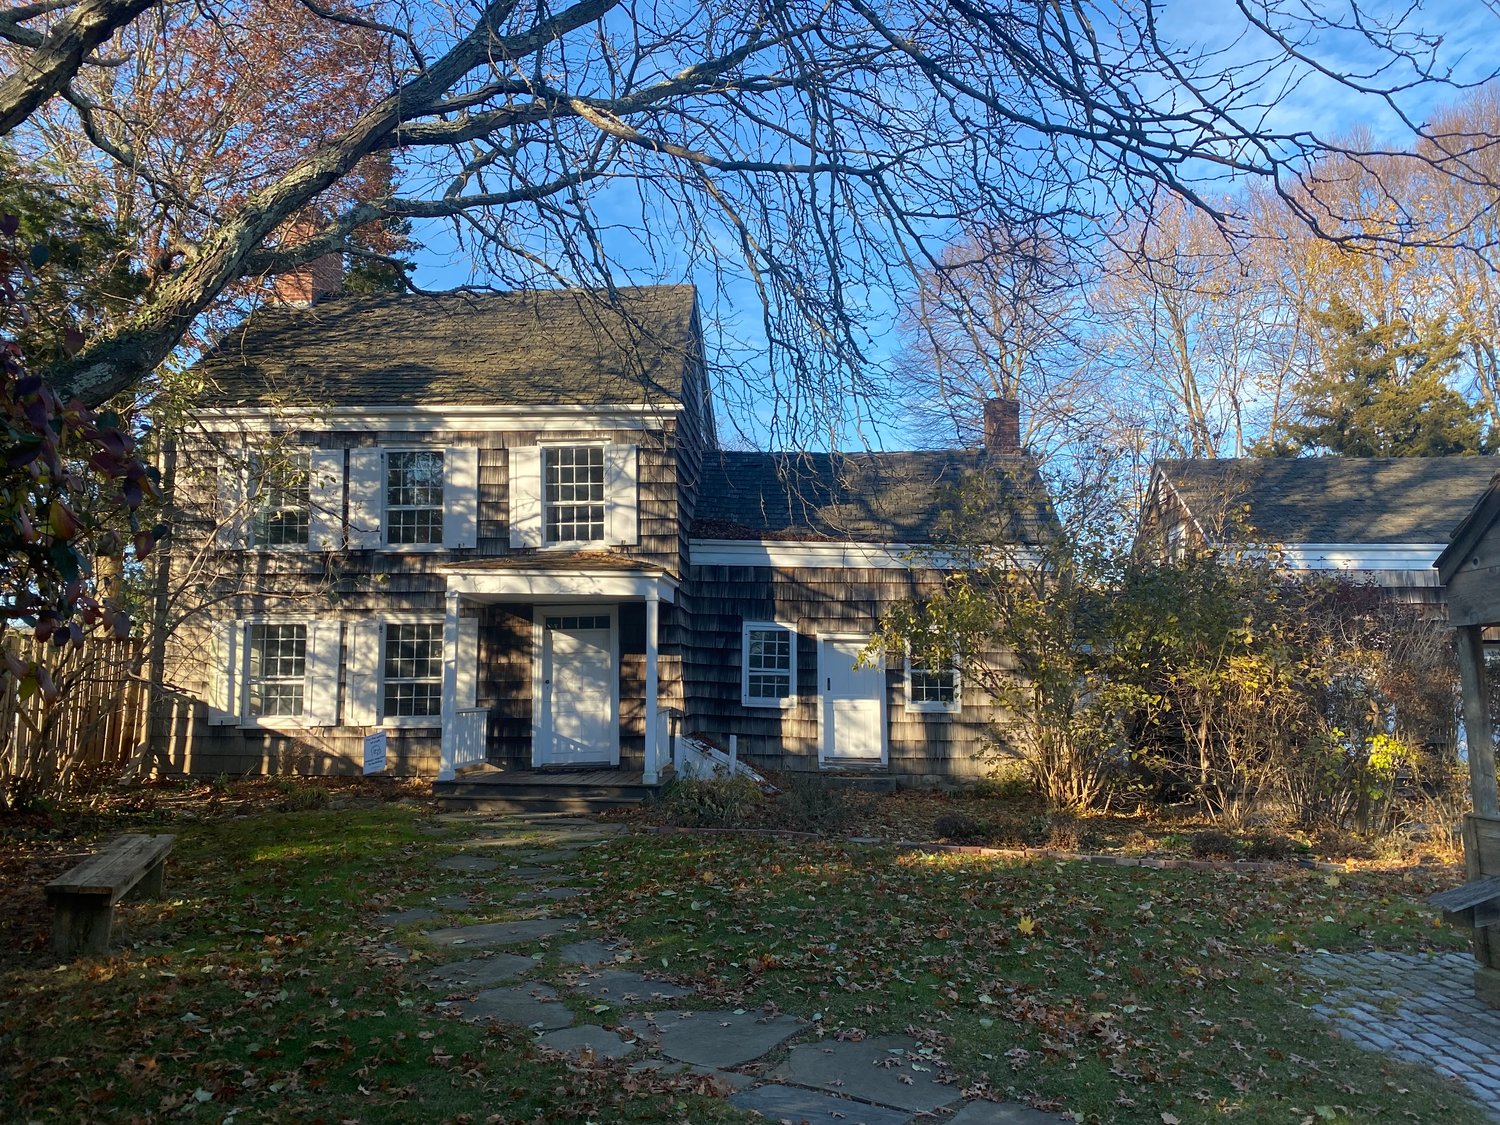 The house in which Walt Whitman was born was built by his father, Walter Whitman Sr.